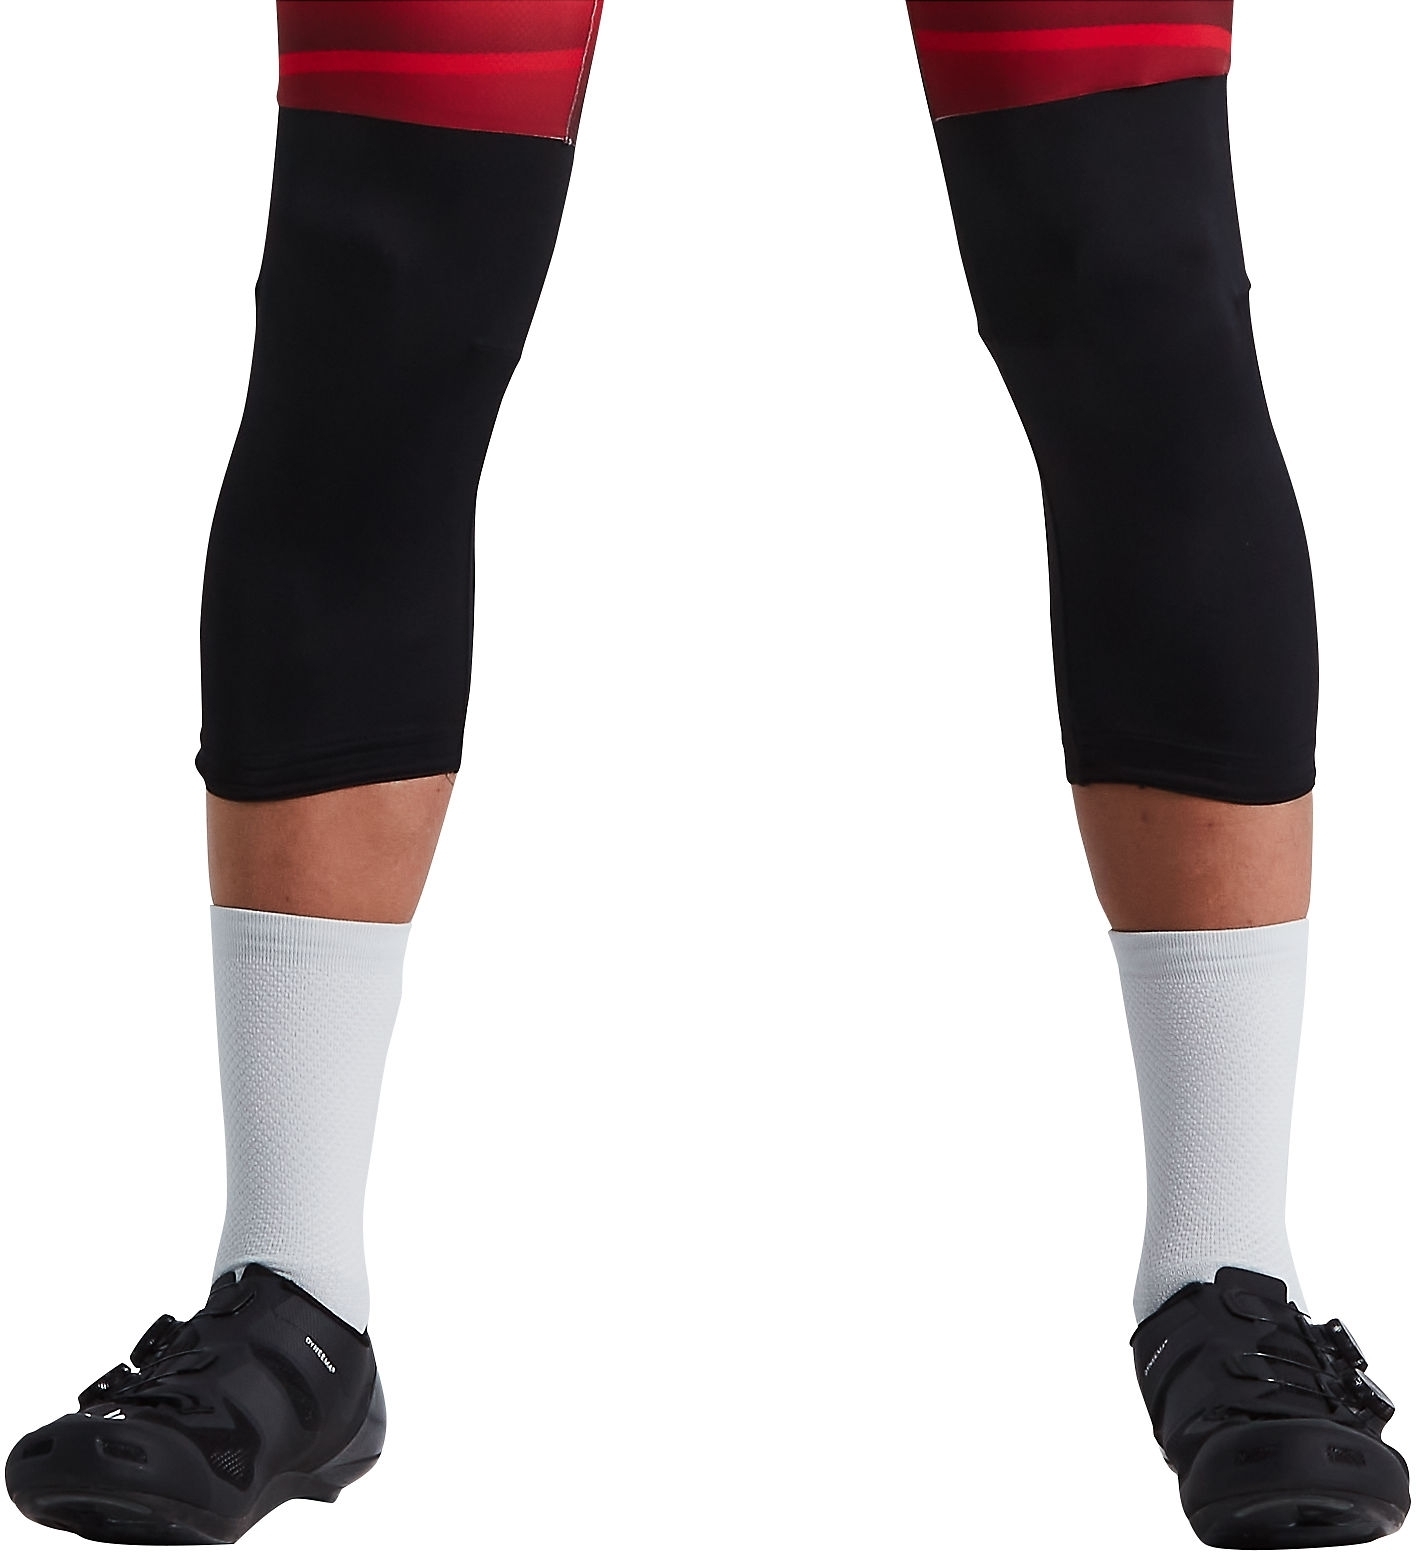 Specialized Knee Cover Lycra - black 3XL